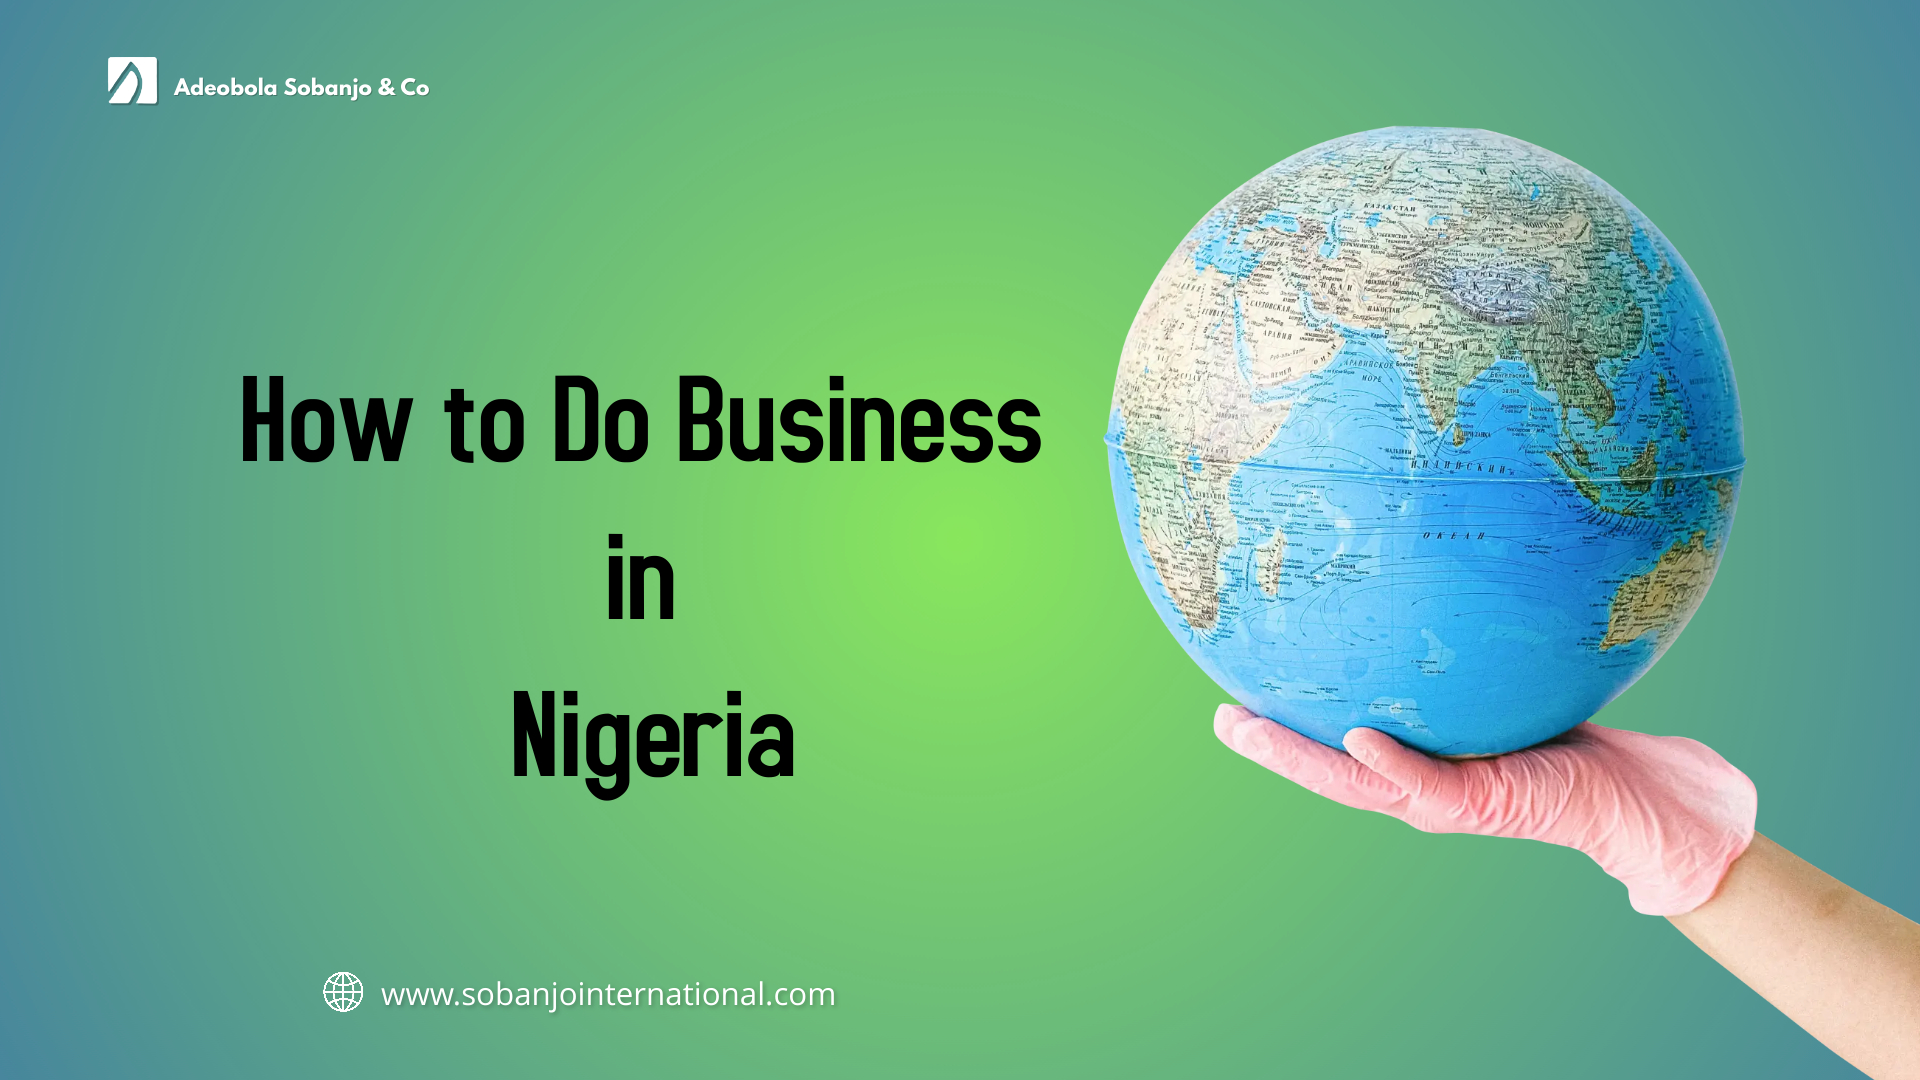 HOW TO DO BUSINESS IN NIGERIA